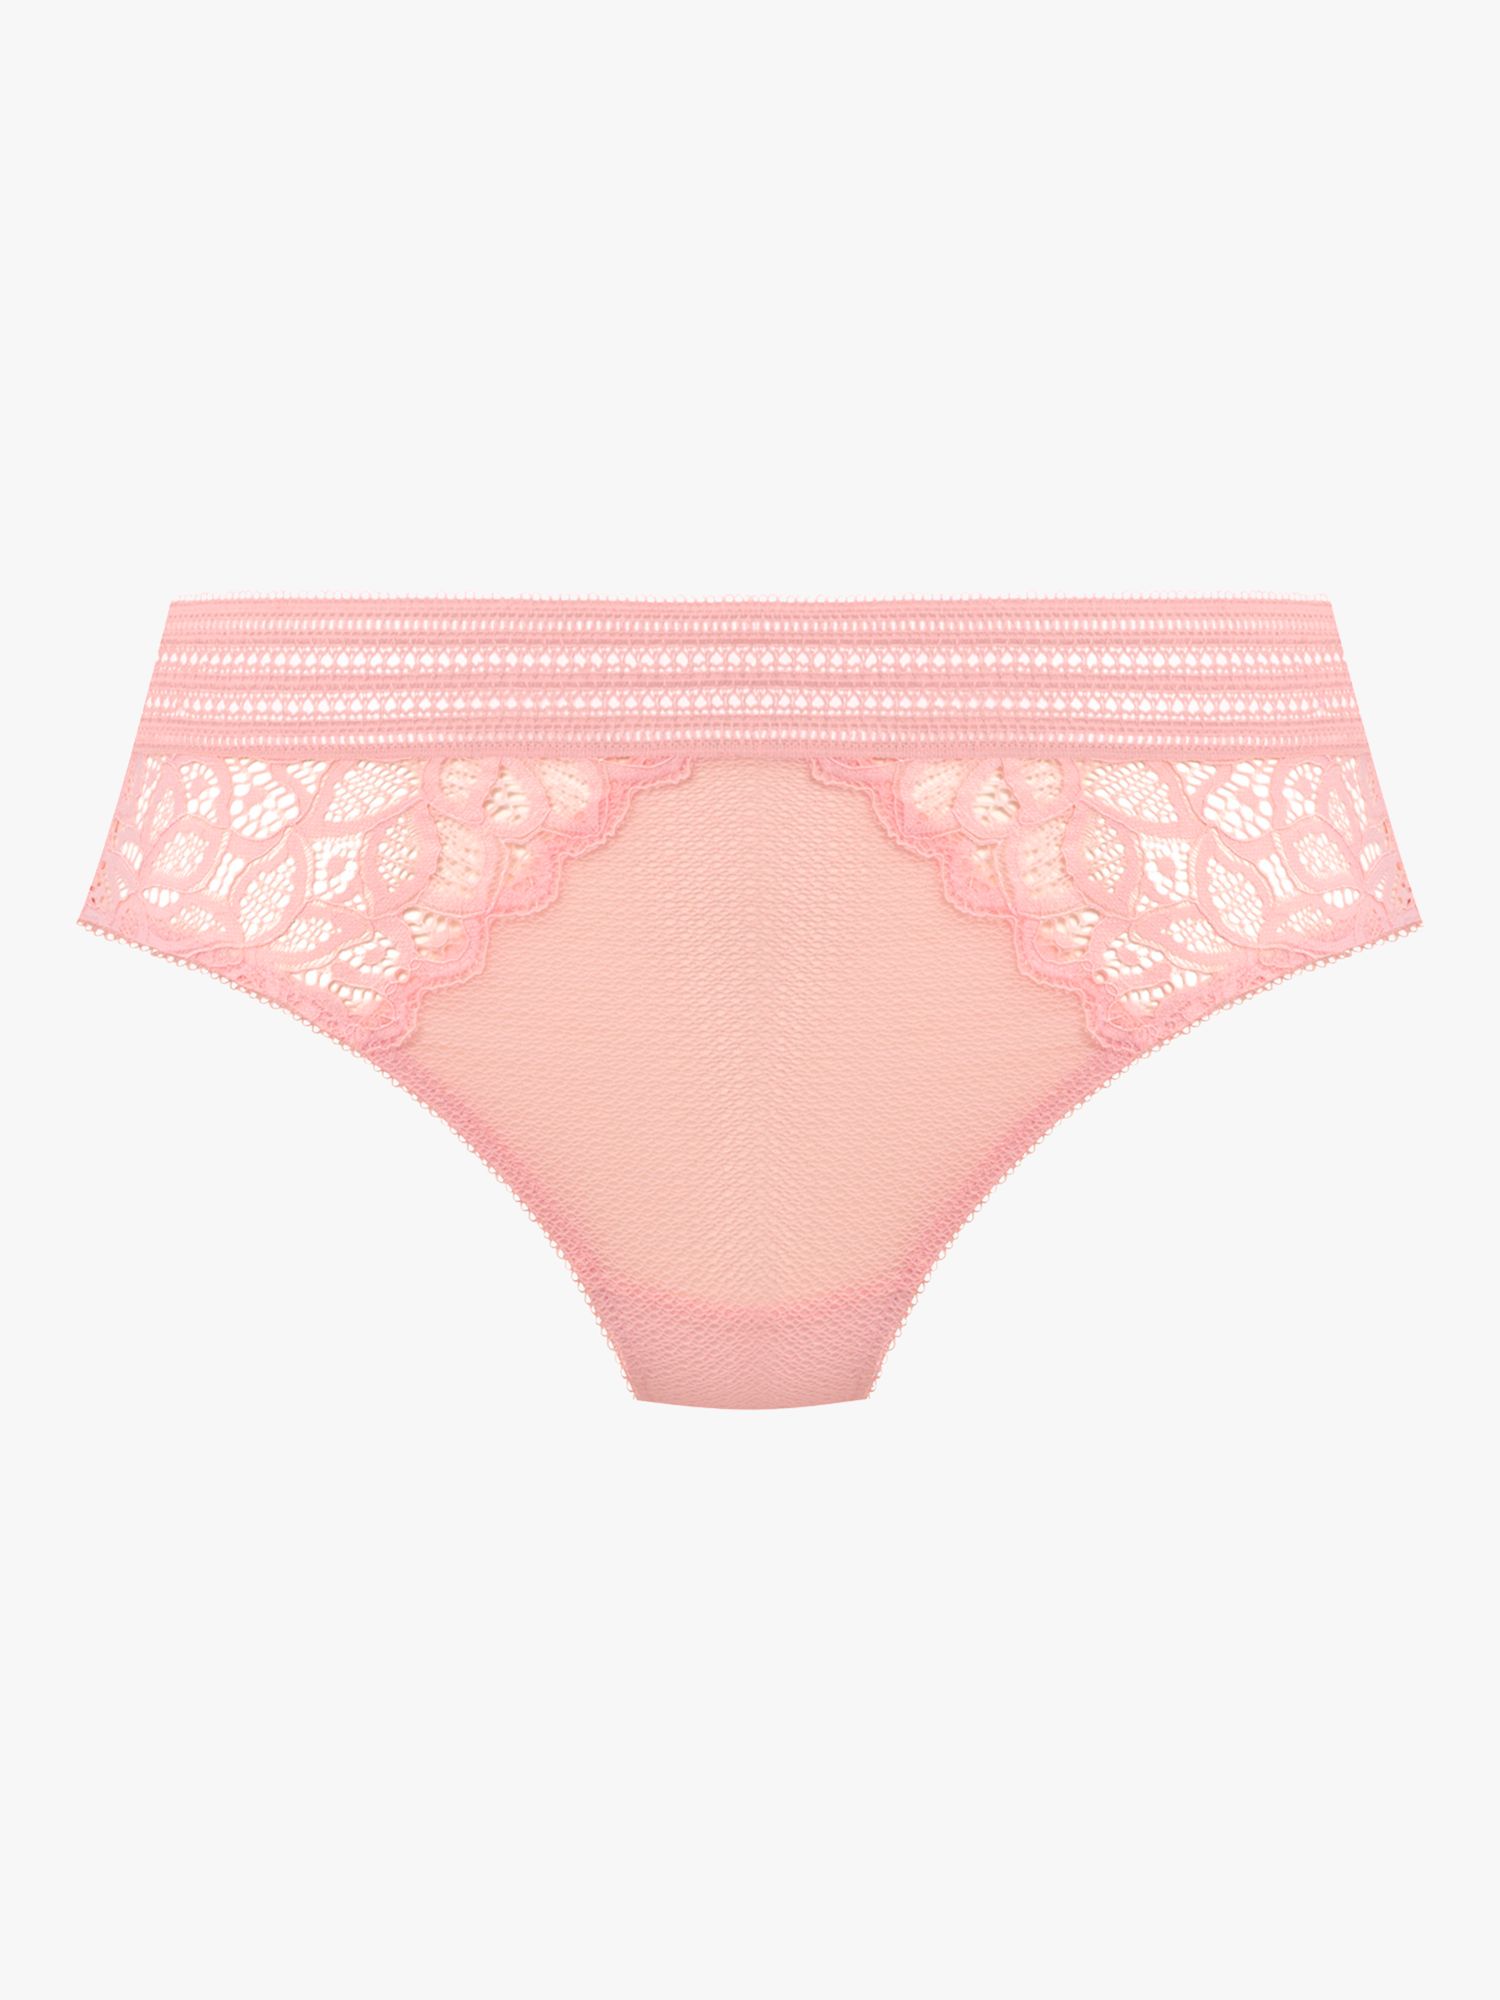 Wacoal Raffiné Lace Knickers, Silver Pink, M